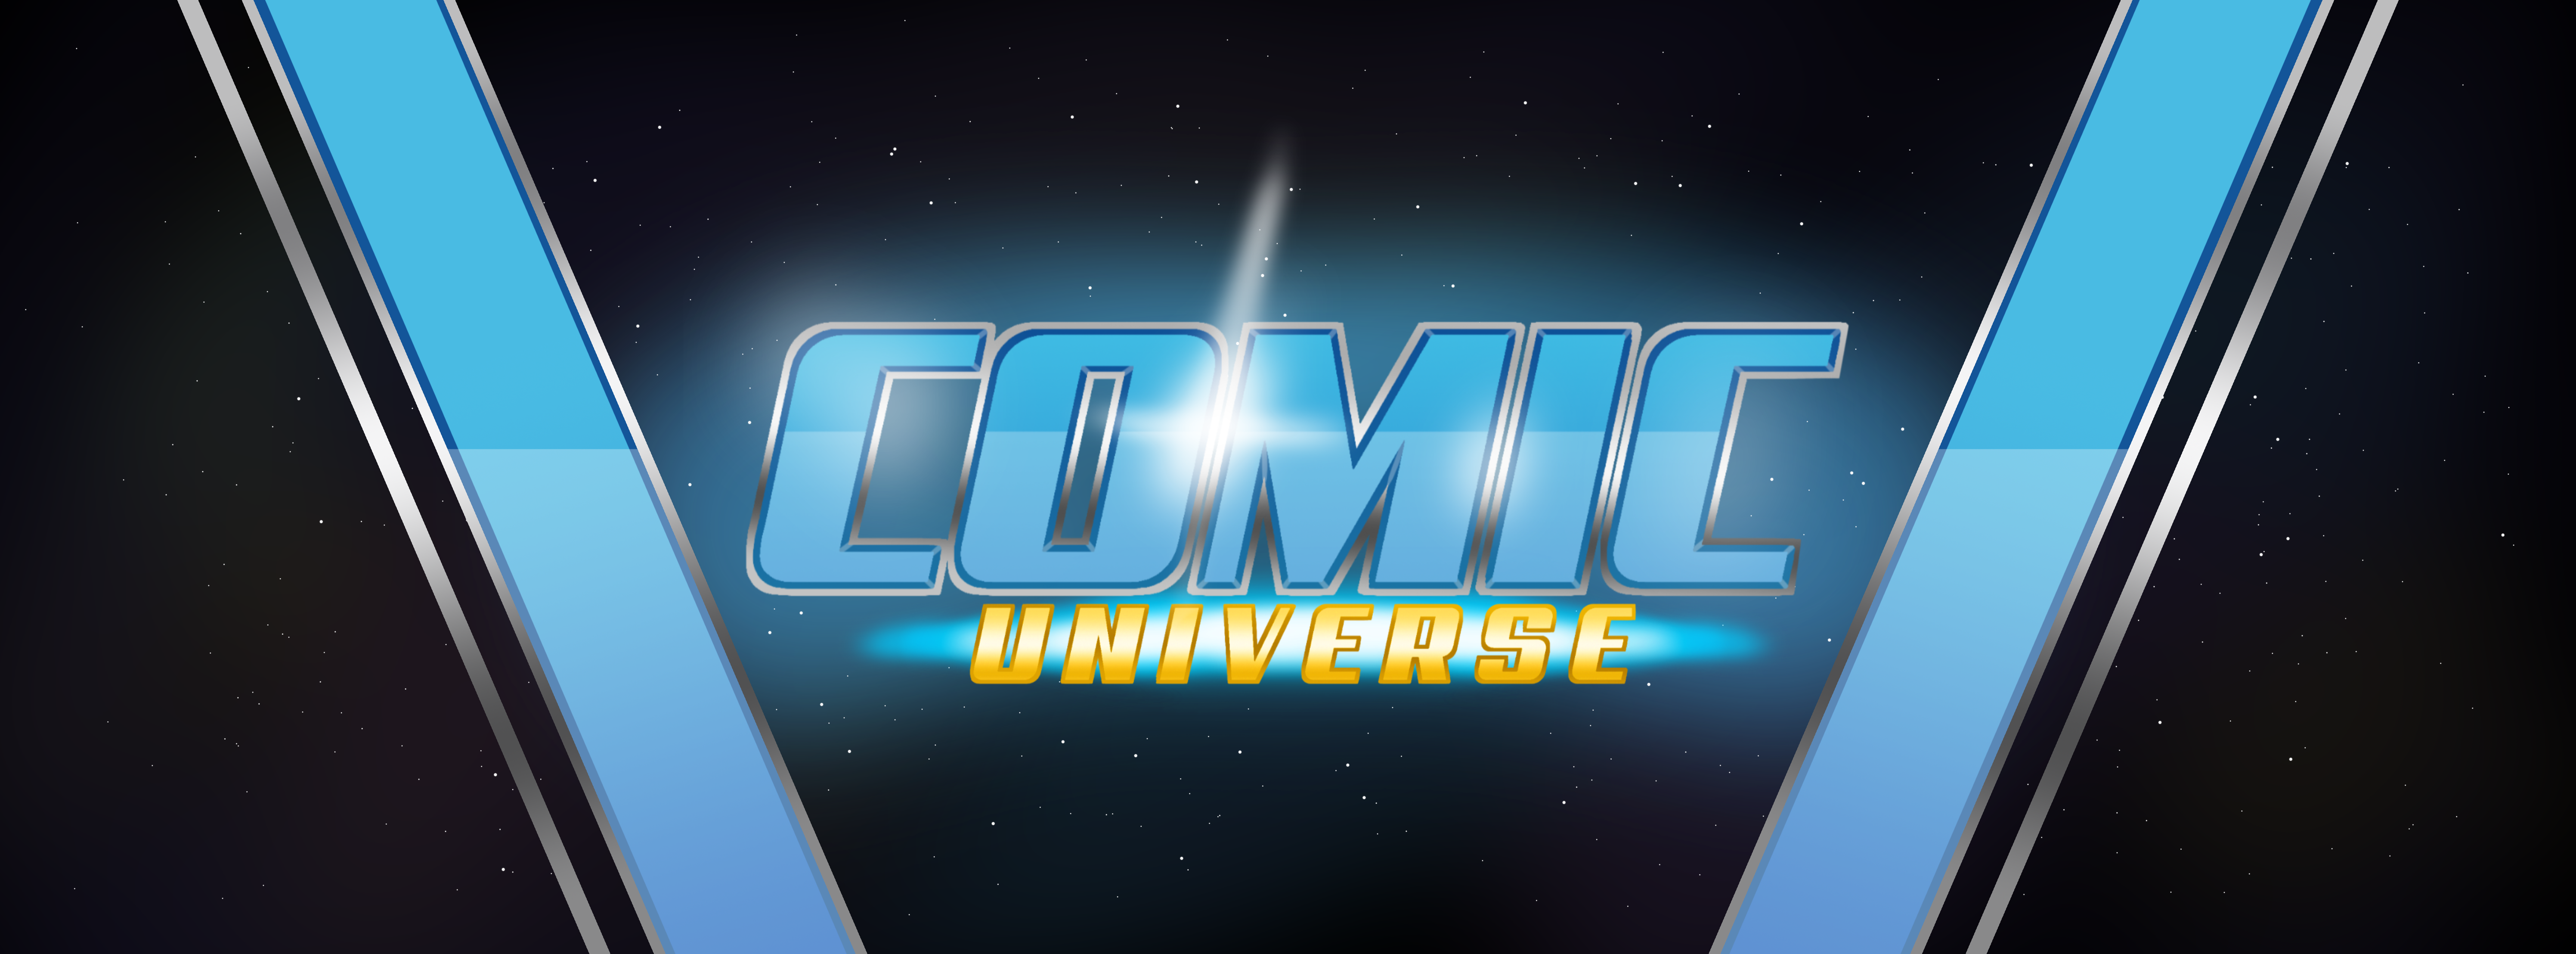 Comicunivers